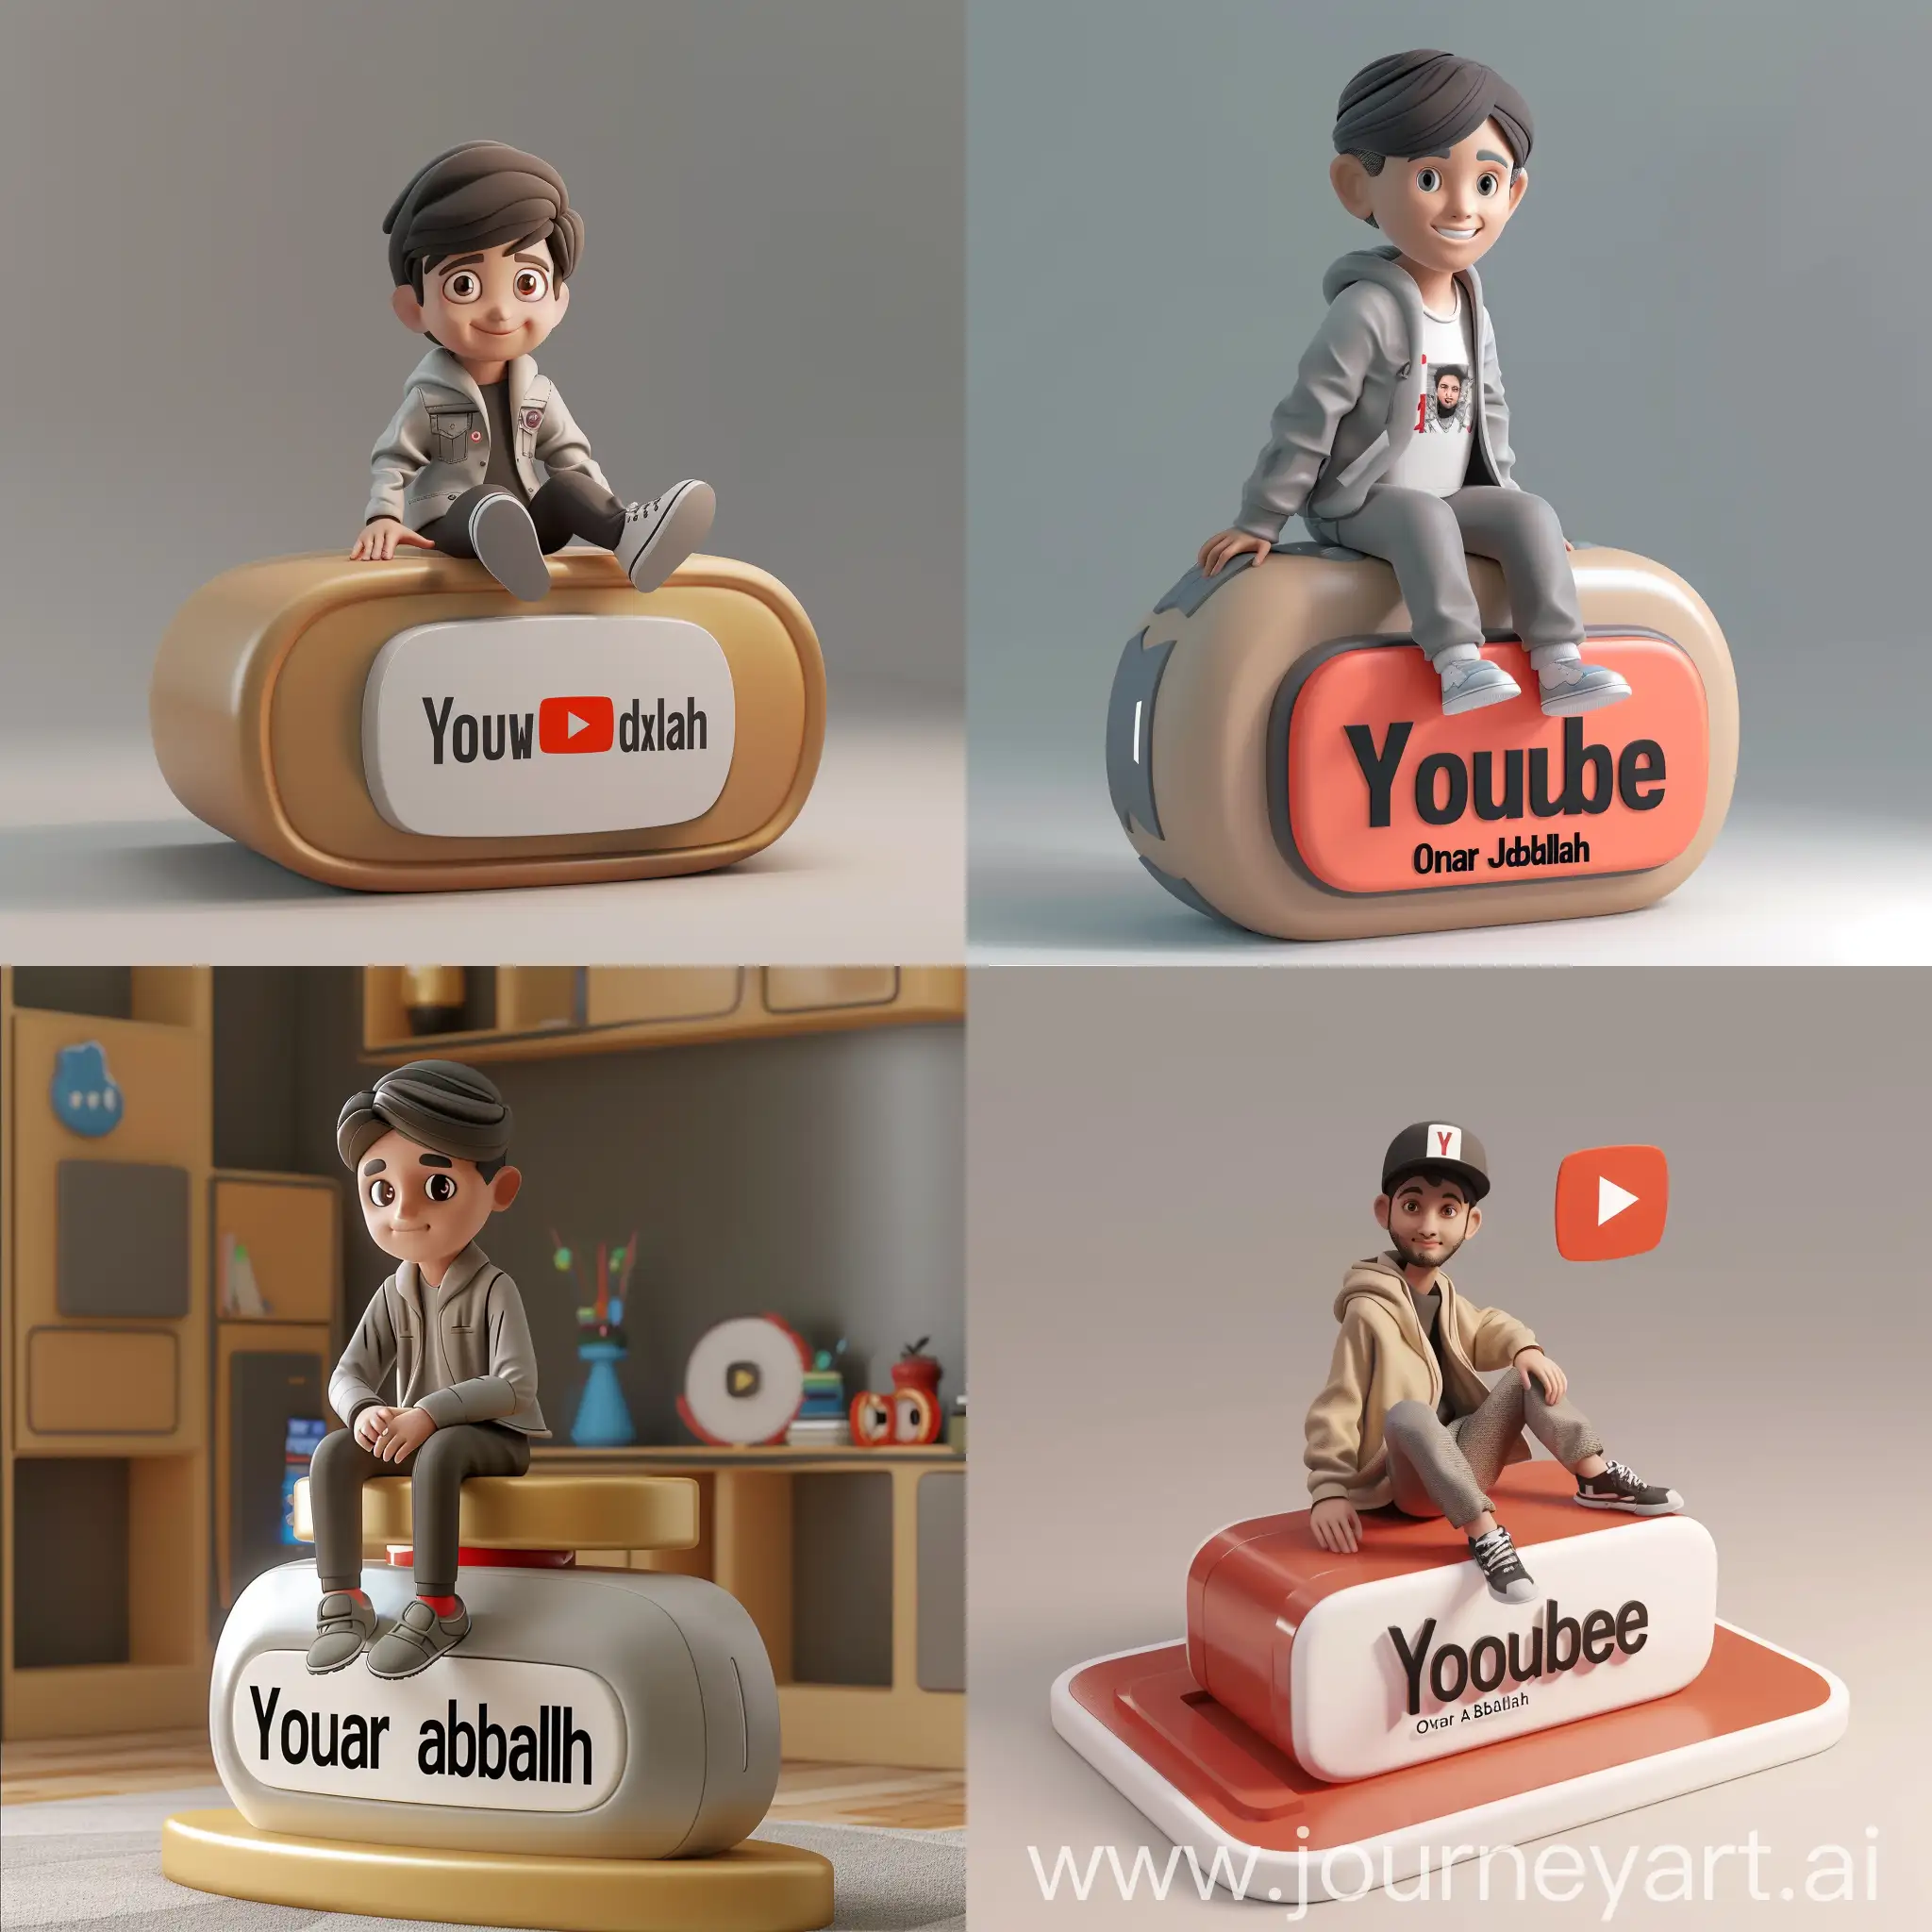 "Create a 3D illustration of an animated character of a handsome boy sitting casually on top of a social media logo "YouTube". The character must wear modern  clothes. The background of the character is mockup of his YouTube profile page with a profile name "Omar AbdAllah" and a profile picture same as character."
البرومبت:  realistic  photo of a cute boy sitting on a logo chair of a social media logo "facebook". wearing Top model clothes. The background is mockup of his Facebook profile page with a profile name "Abdallah khidr" and a profile picture . soft light reflection
